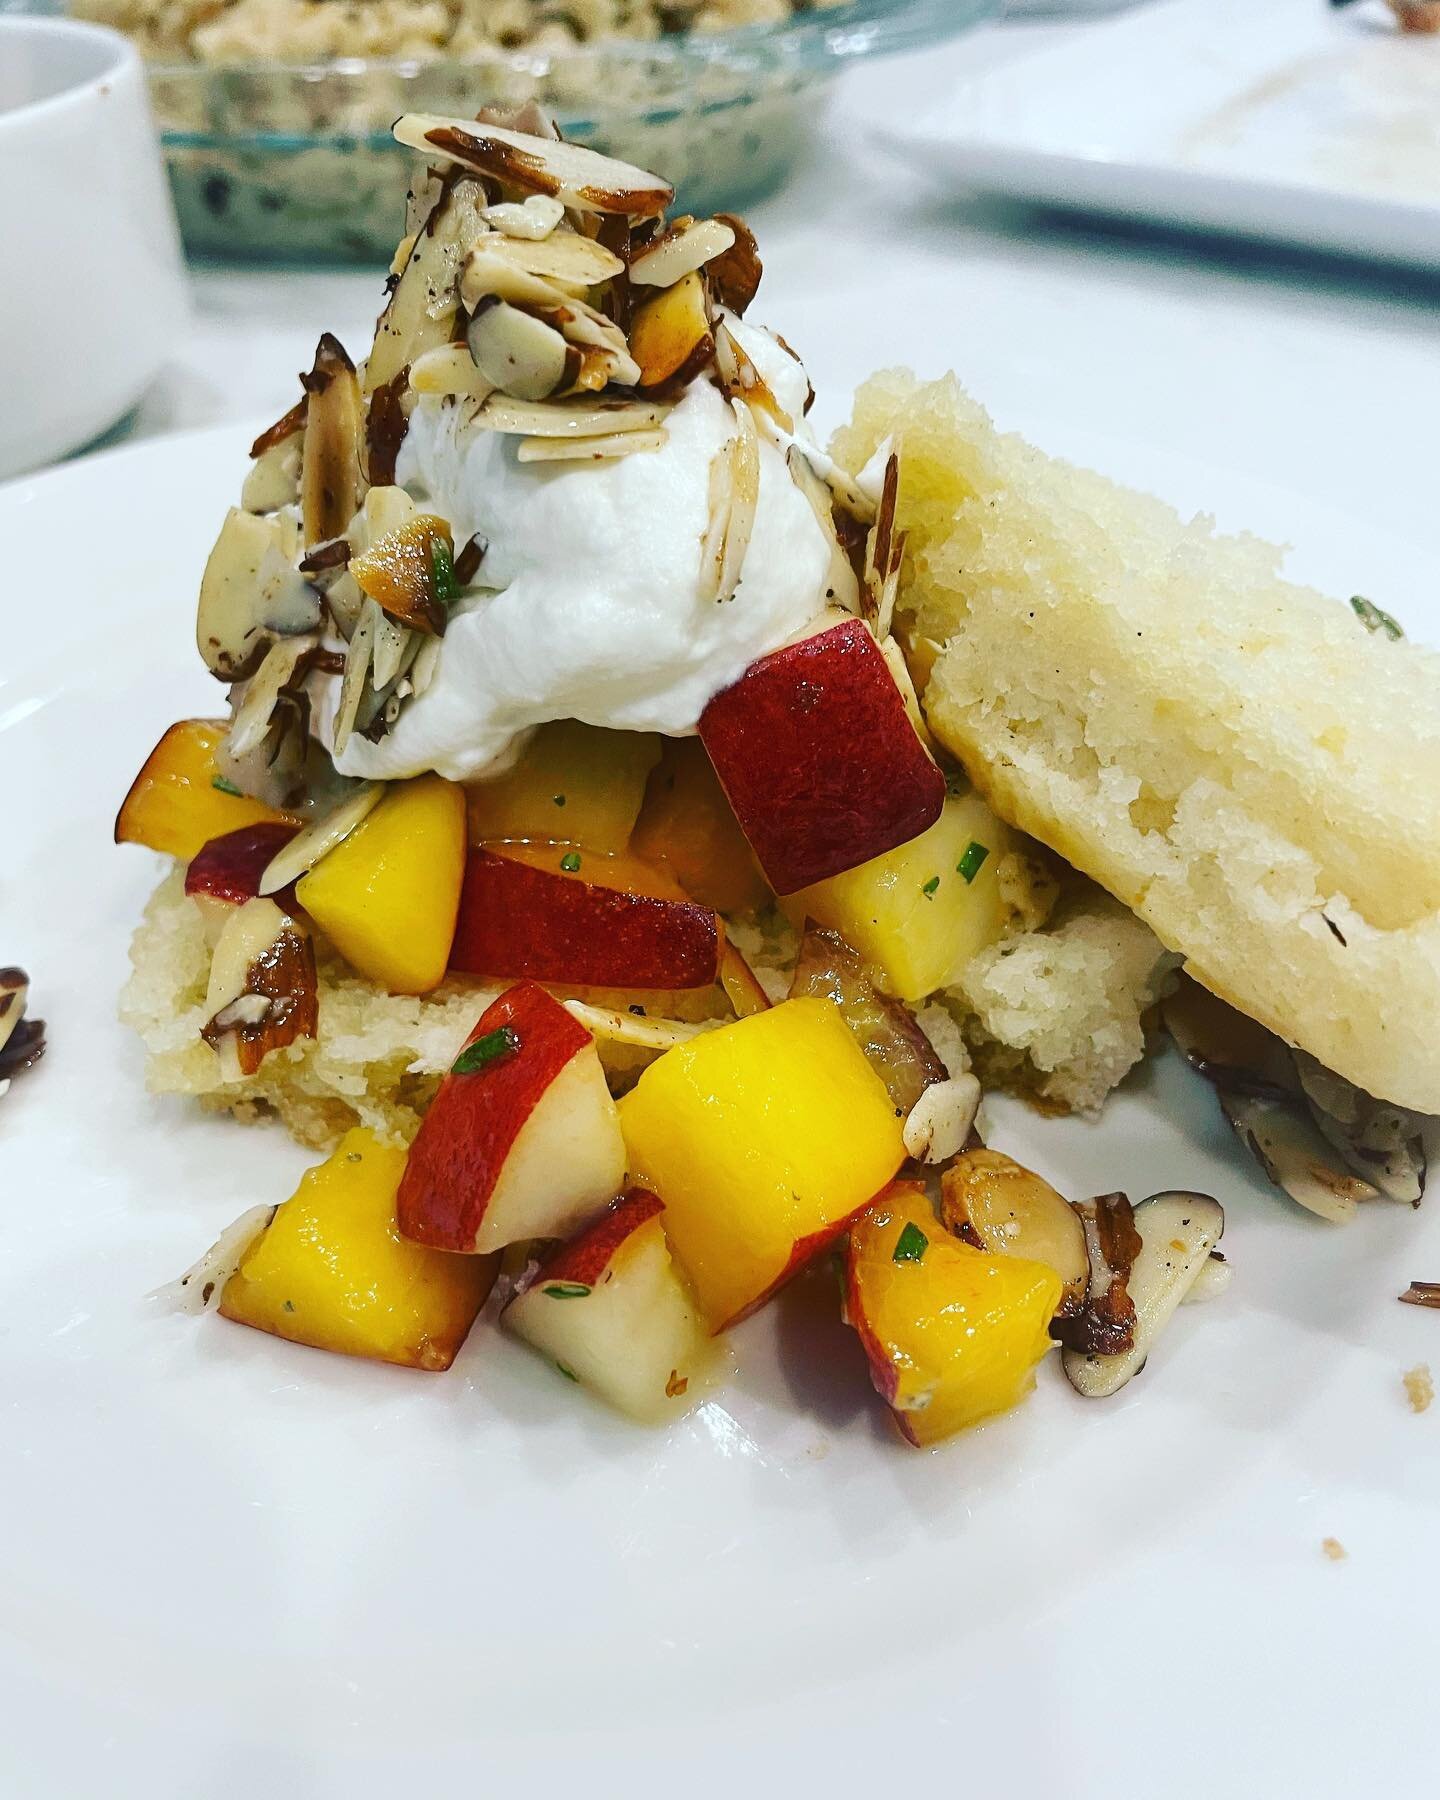 Who wants short cakes?! Rosemary and honey macerated nectarines and peaches over a vanilla bean biscuit with brown butter almonds and cream&hellip; Yes, please! #thecarolinachef #personalchef #privatechef #charlestonsc #vacationchef @inspirato @chsto